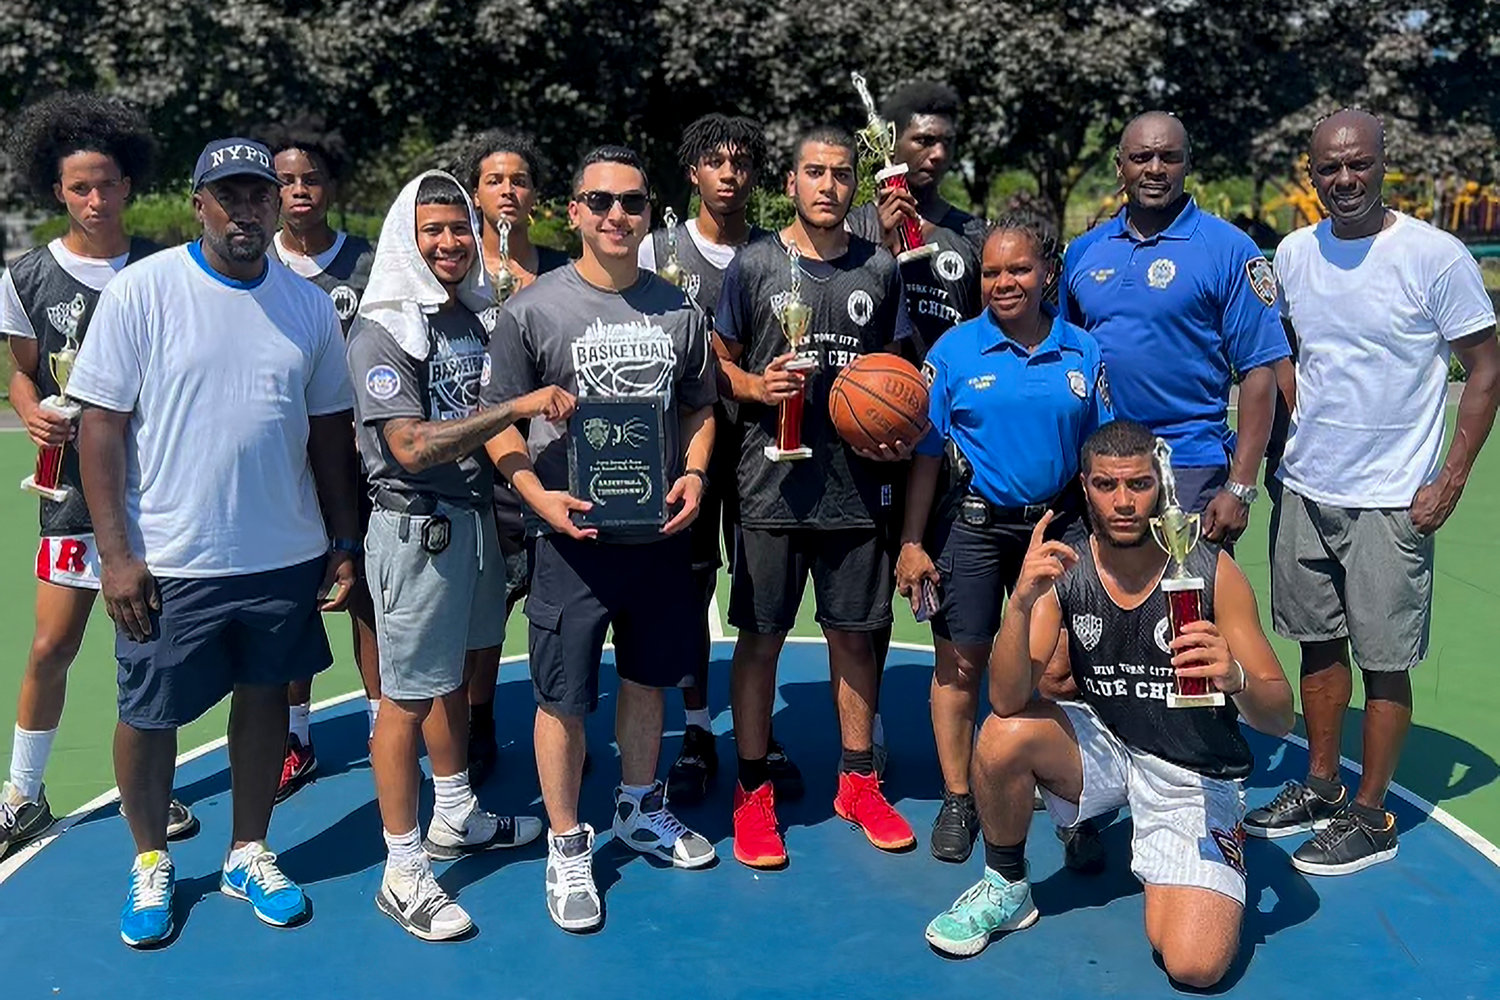 The 50th Precinct’s basketball team formed through the NYPD Blue Chips program won the Bronx Borough Championship after winning eight games against other Bronx-based precincts. The wins aren’t just coming on the court, however, with the program also providing academic and social support to the teenagers involved.